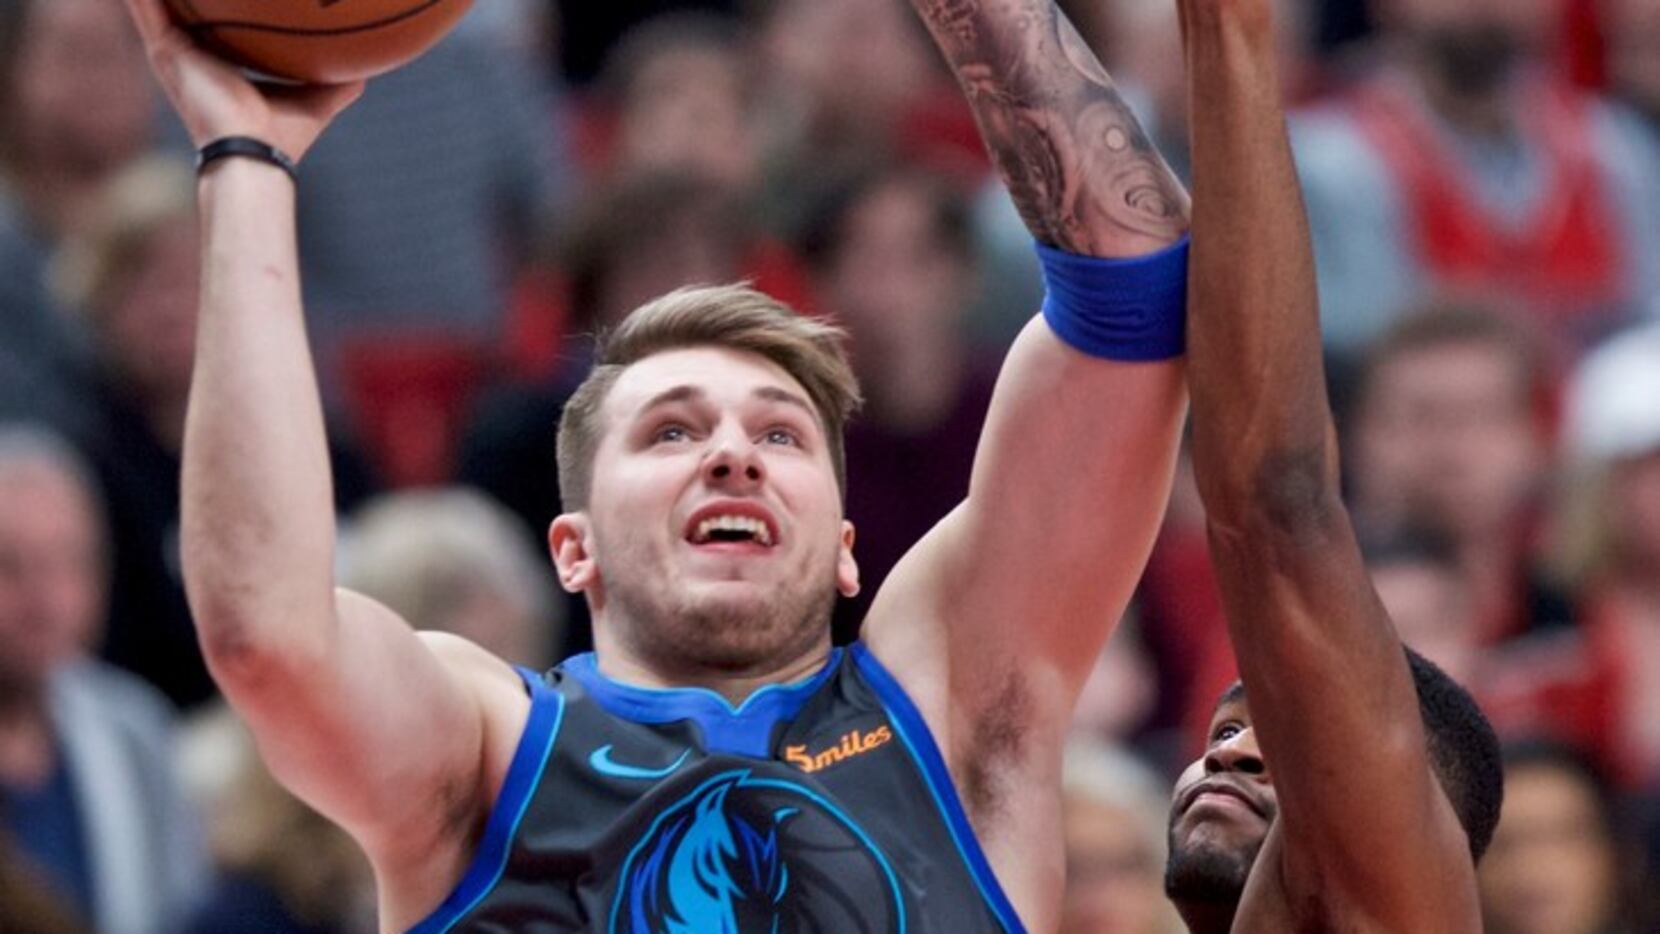 VIDEO: Luka Doncic Hits Miracle Buzzer-Beater to Force Overtime